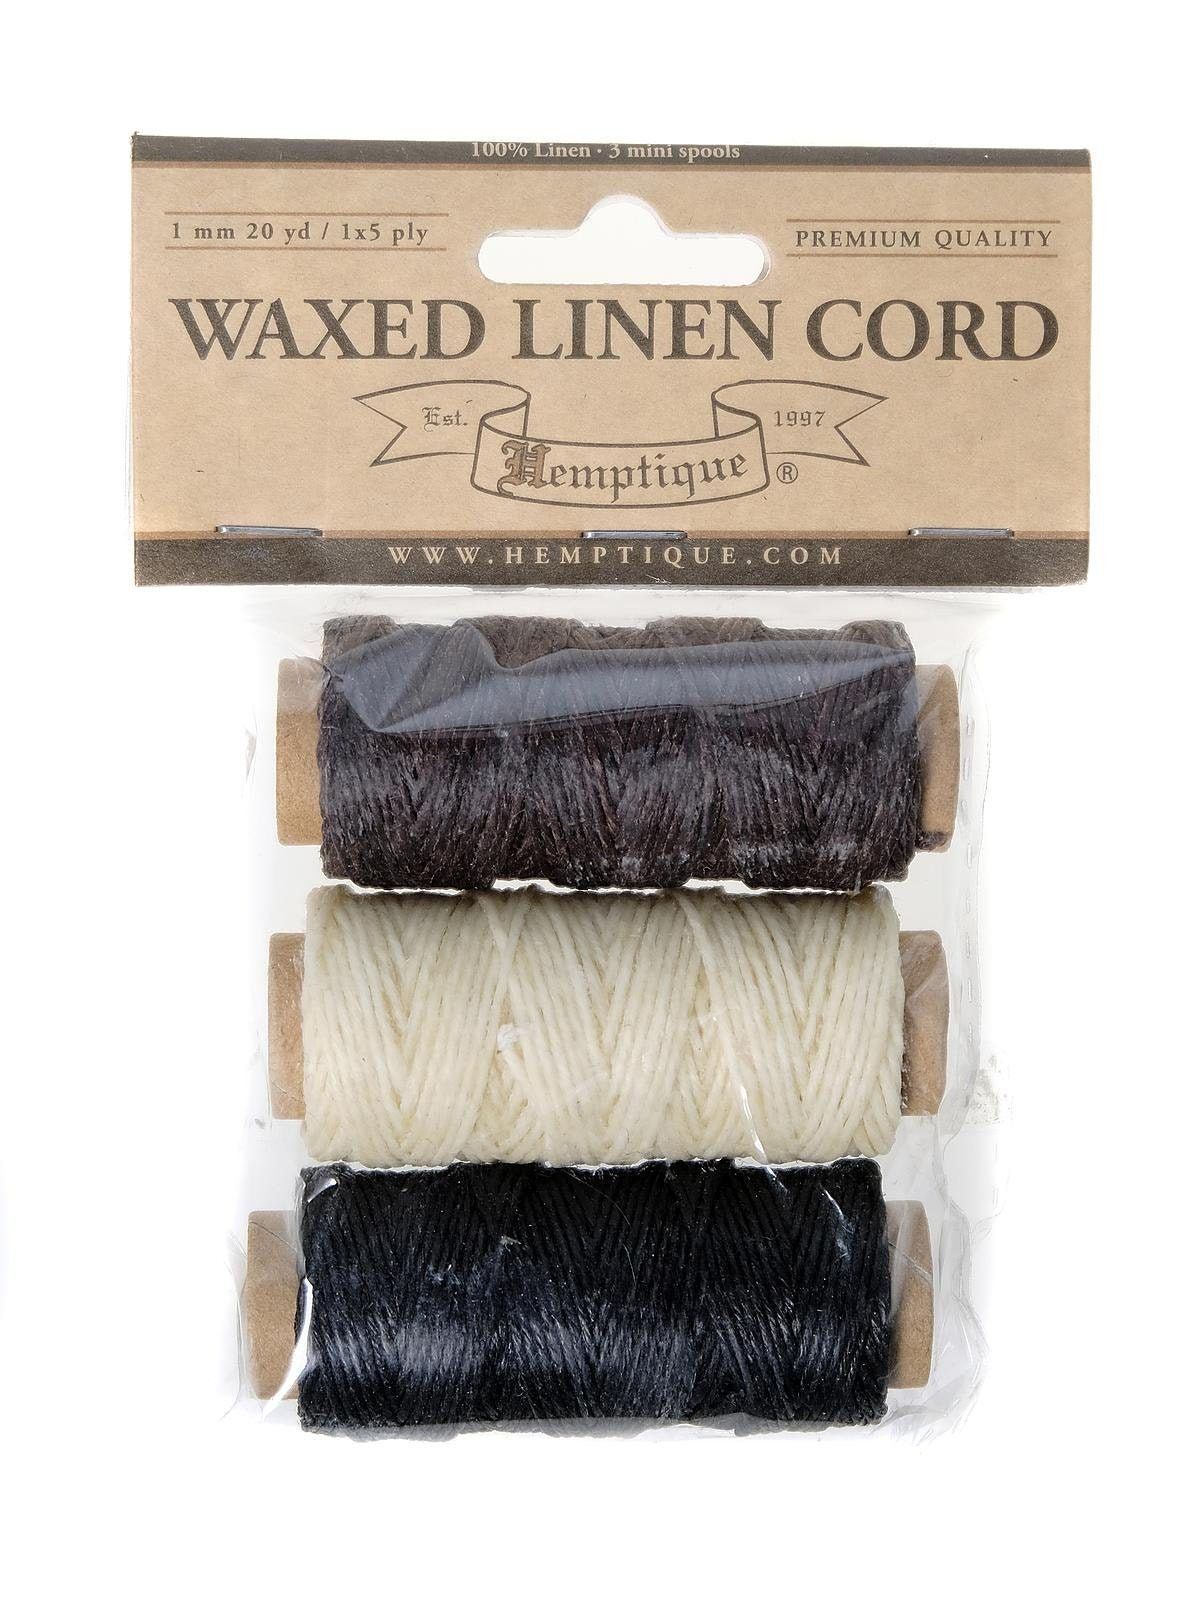 Lineco Waxed Genuine Linen Thread, 20 Yards, Pack of 3 Spools